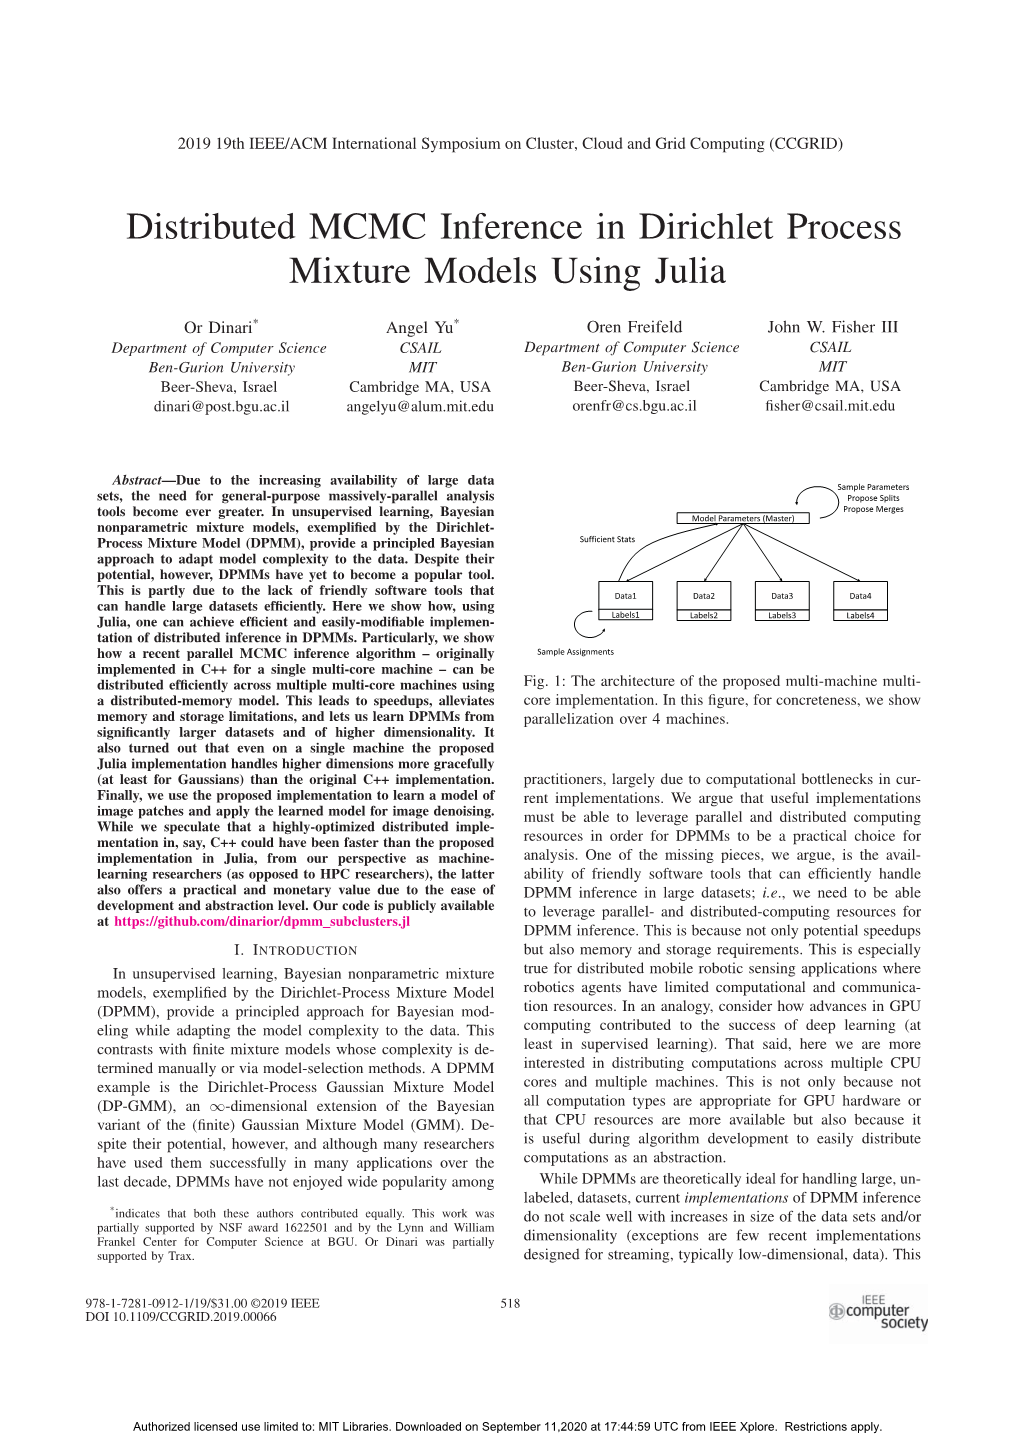 Distributed MCMC Inference in Dirichlet Process Mixture Models Using Julia